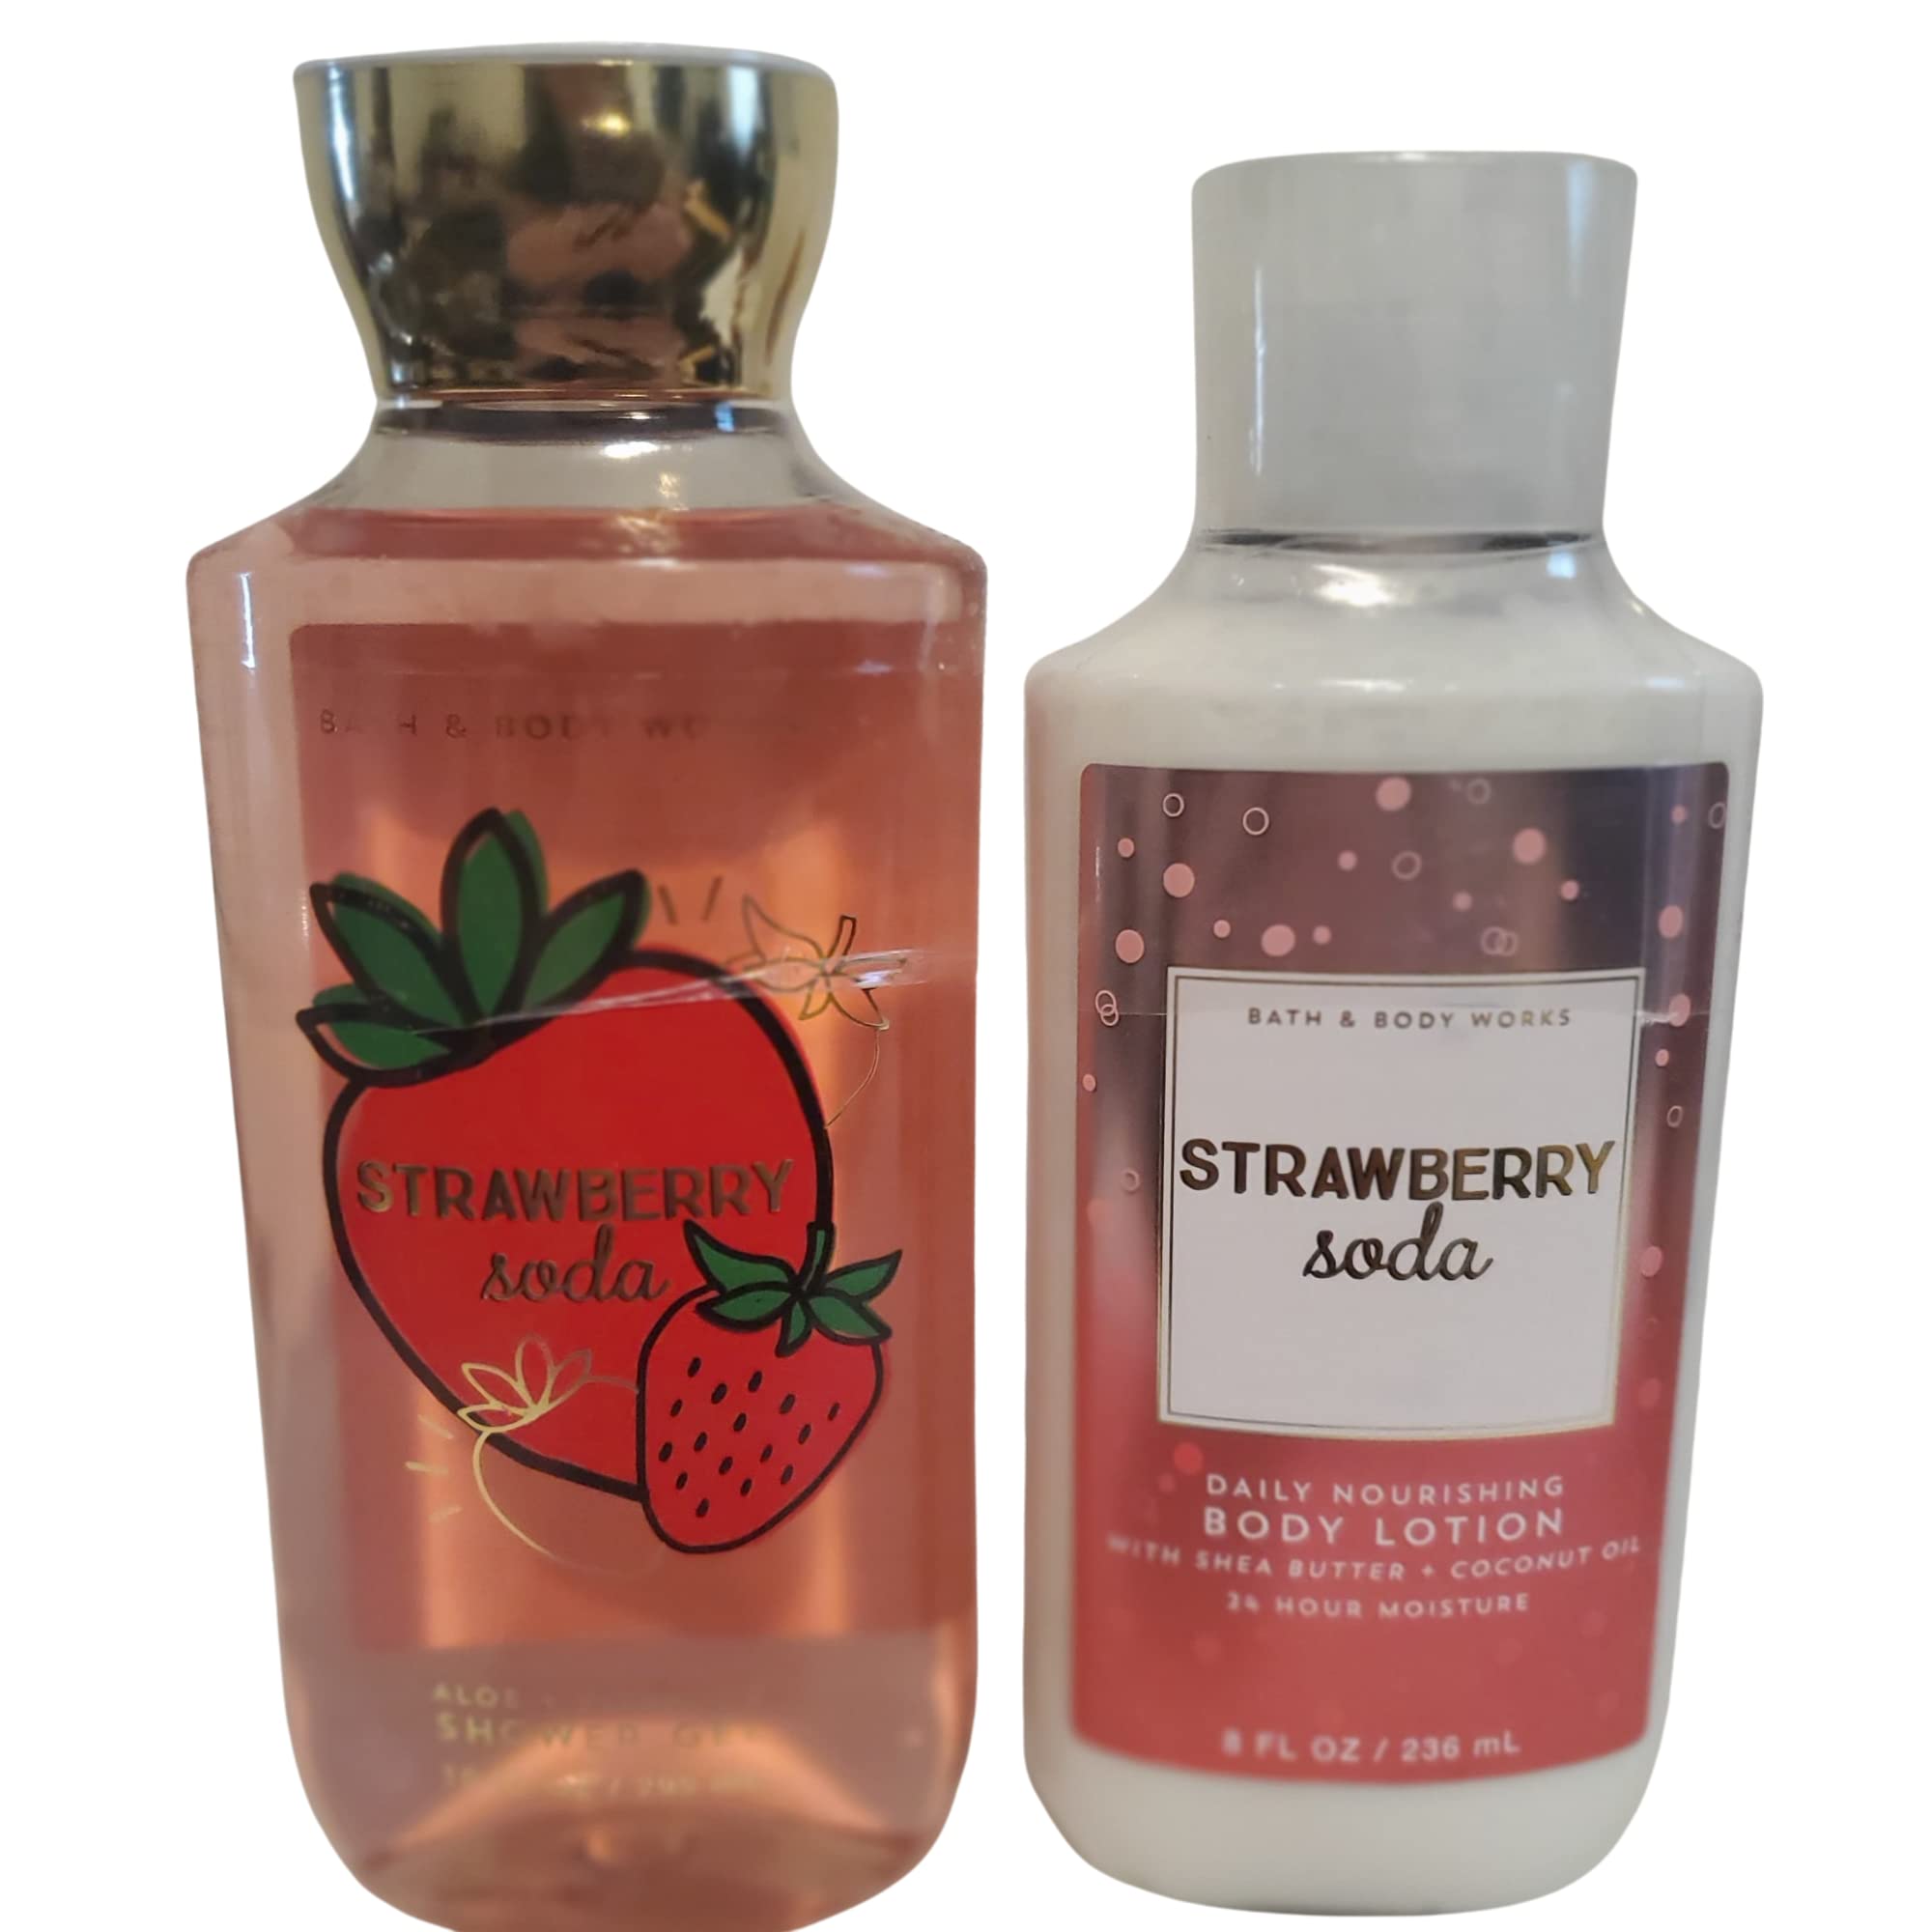 Bath and Body Works Gift Set of 10 oz Shower Gel and 8 oz Lotion (Strawberry Soda)